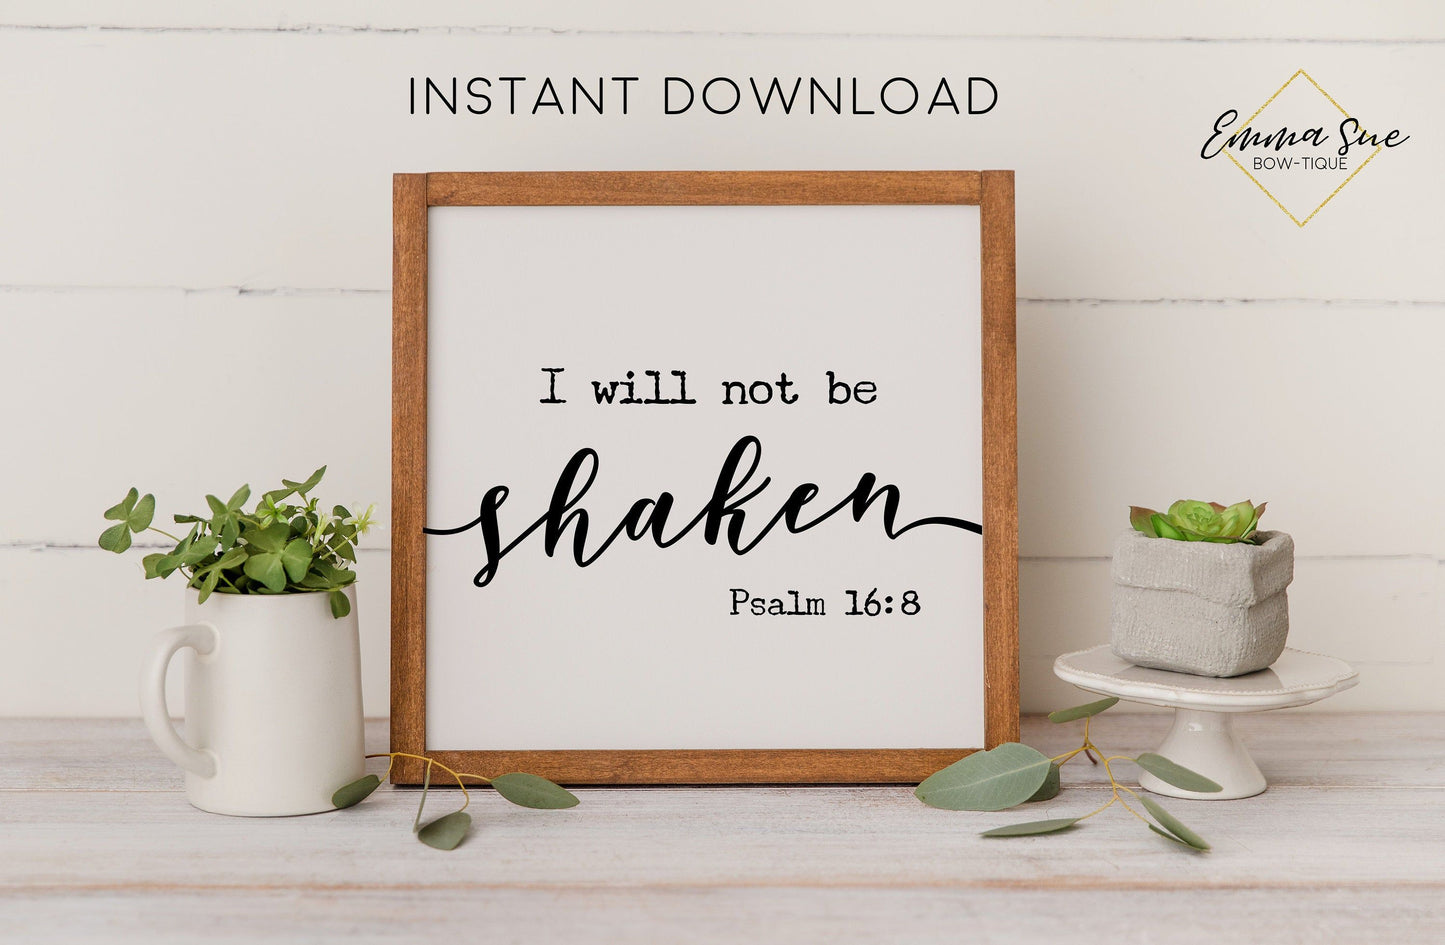 I will not be shaken - Psalm 16:8 Bible Verse Farmhouse Printable Sign Wall Art